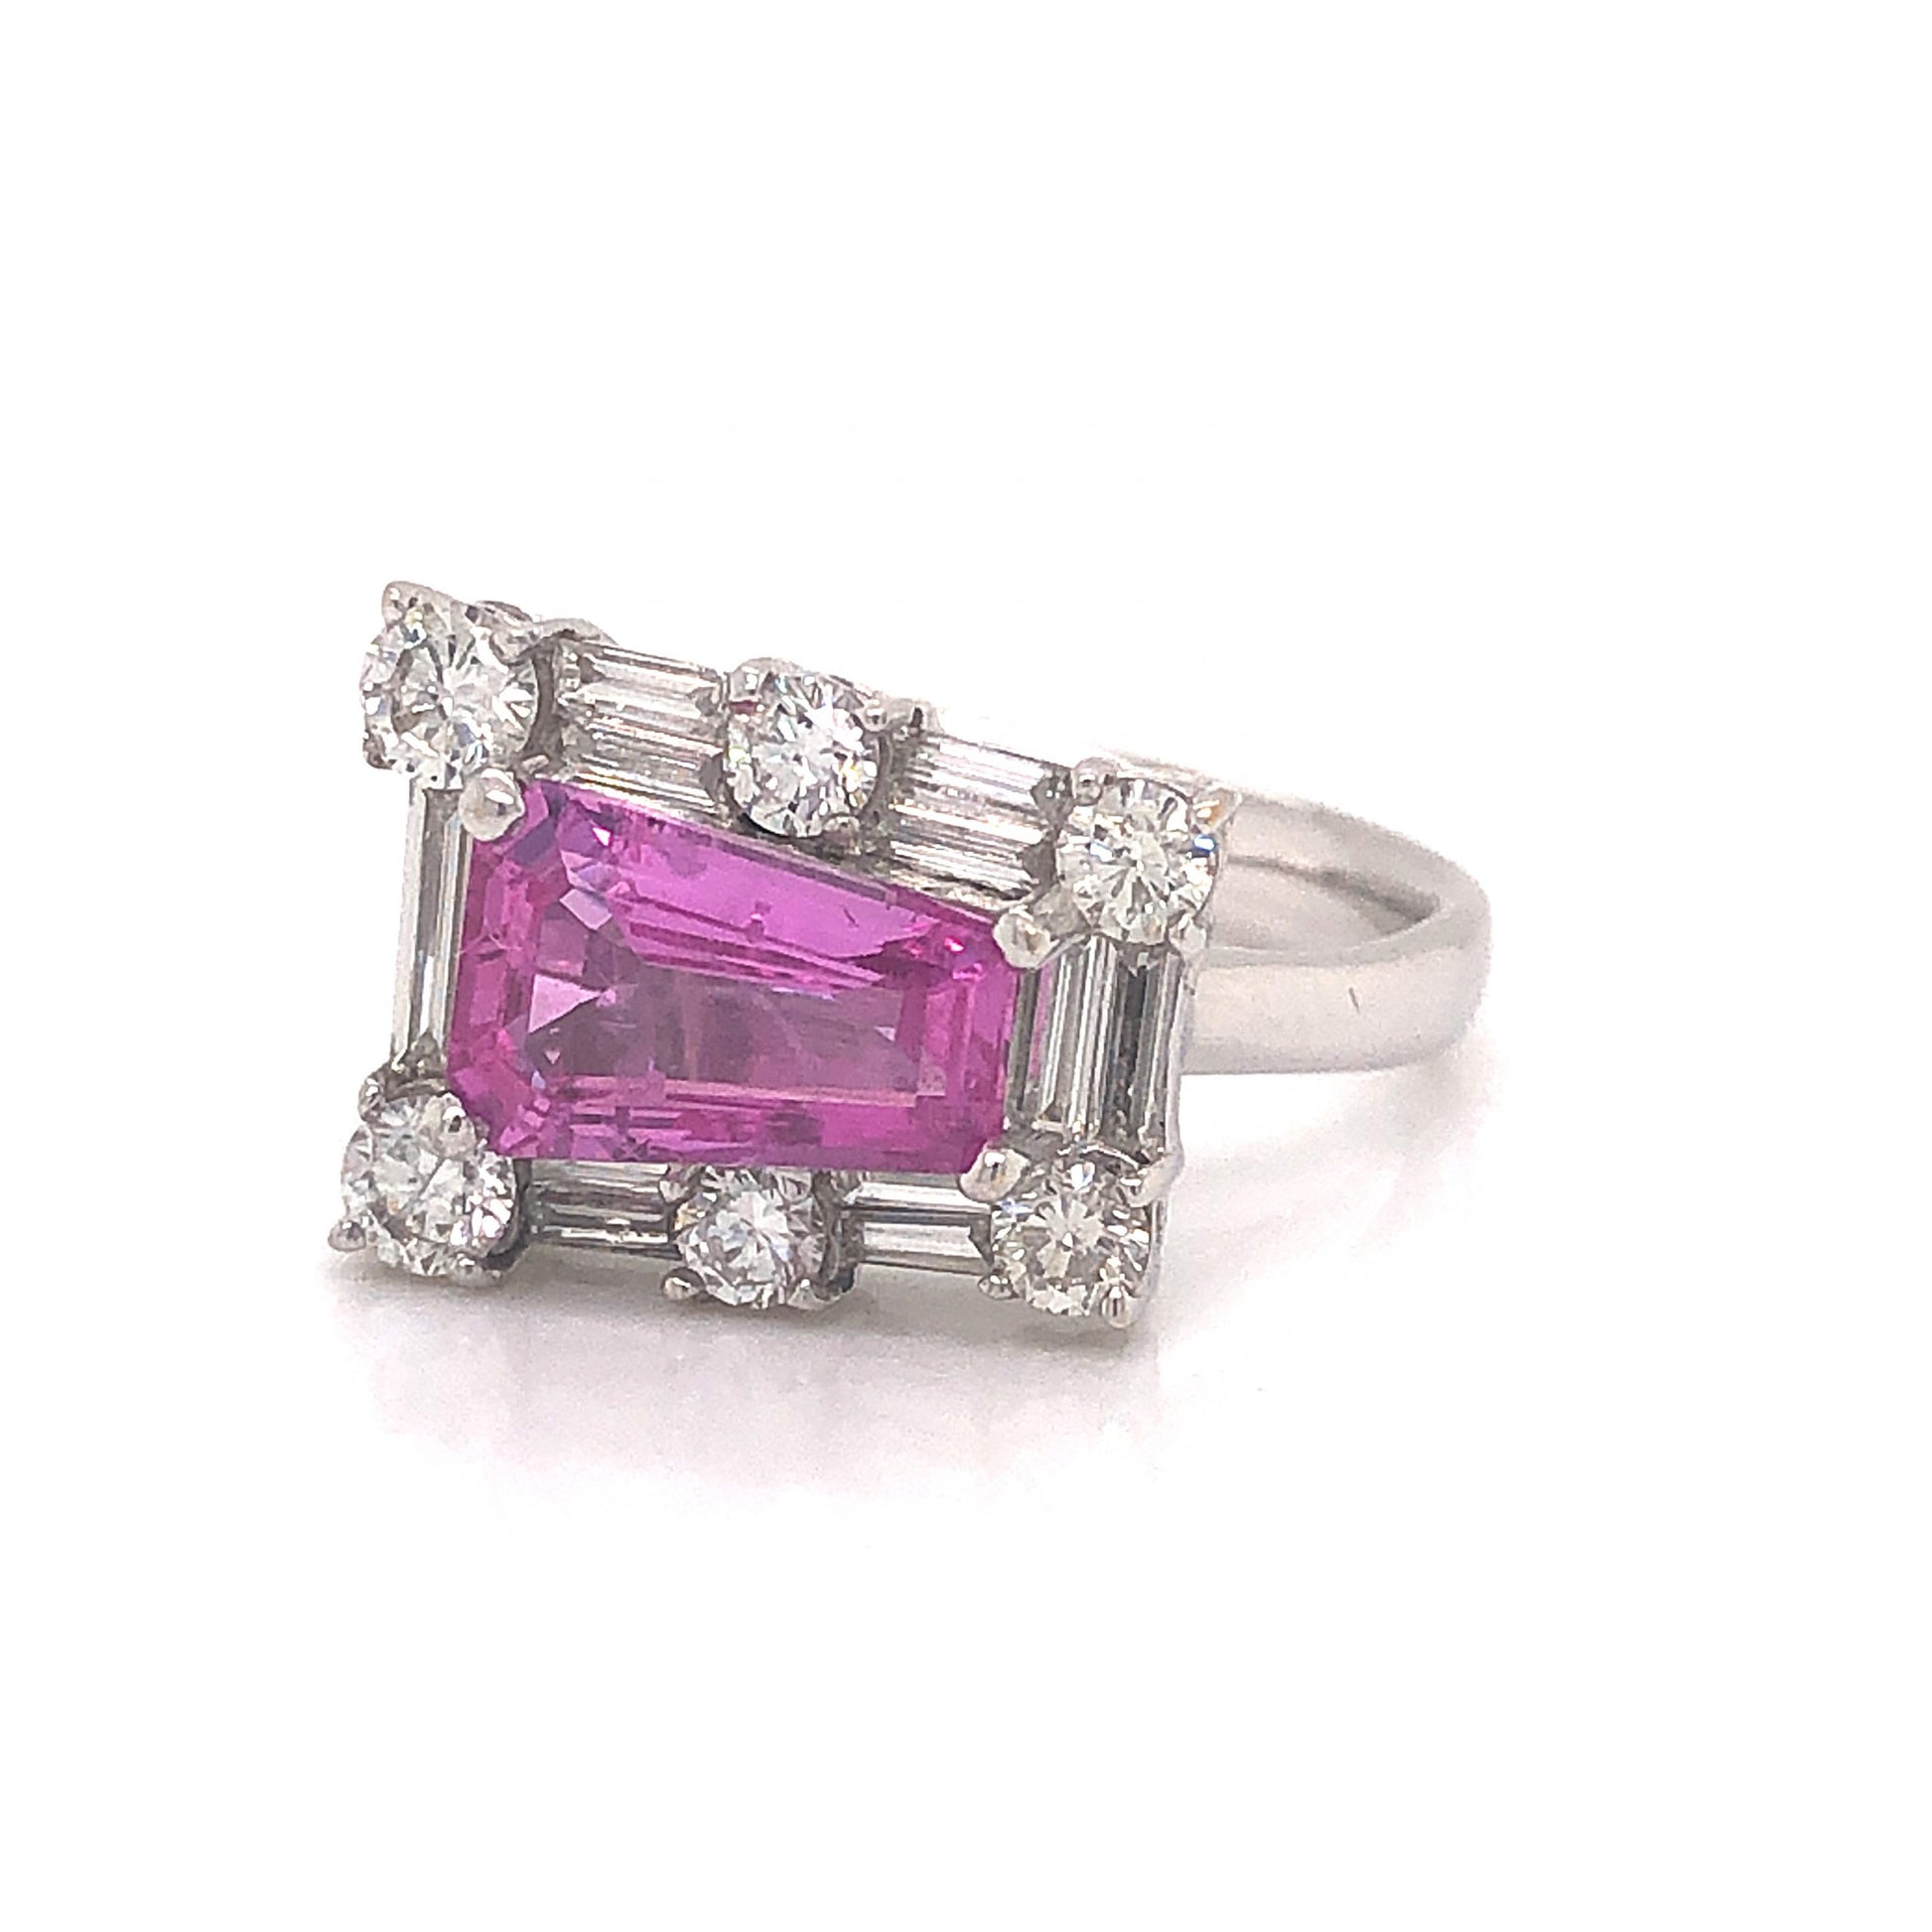 Pink Sapphire & Diamond Cocktail Ring in 18k White GoldComposition: 18 Karat White Gold Ring Size: 6 Total Diamond Weight: .63ct Total Gram Weight: 5.3 g Inscription: K18WG 1.86 D 0.63
      